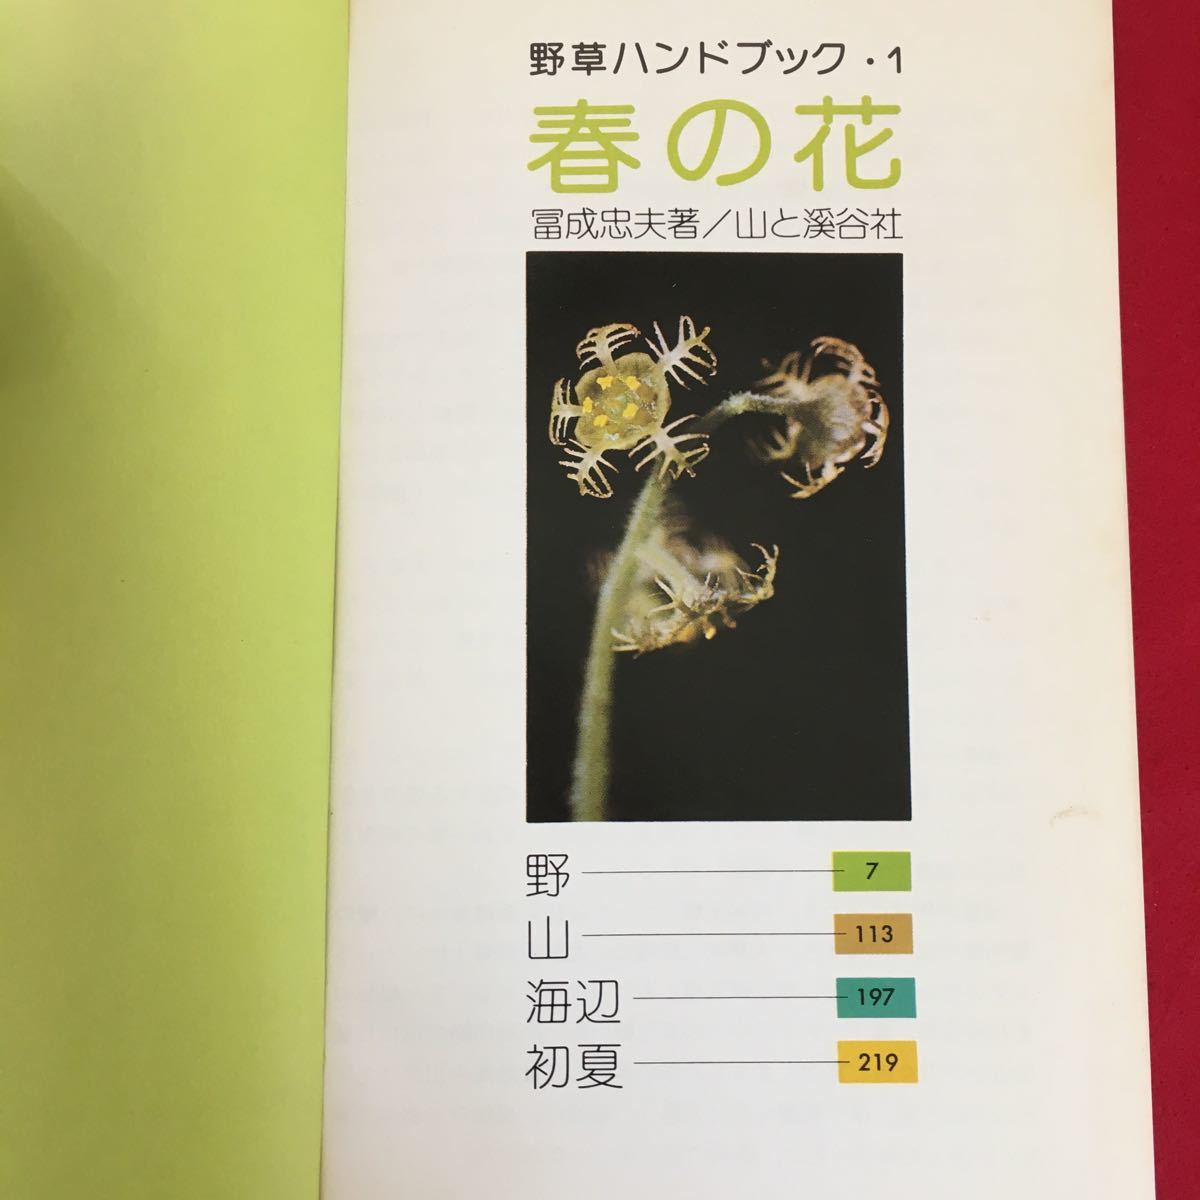 h-222*6/ wild grasses hand book Ⅰ spring. flower Showa era 55 year 1 month 5 day 11 version 1. author ... Hara issue person Kawasaki . light ./ mountain / sea side / the first summer etc. 